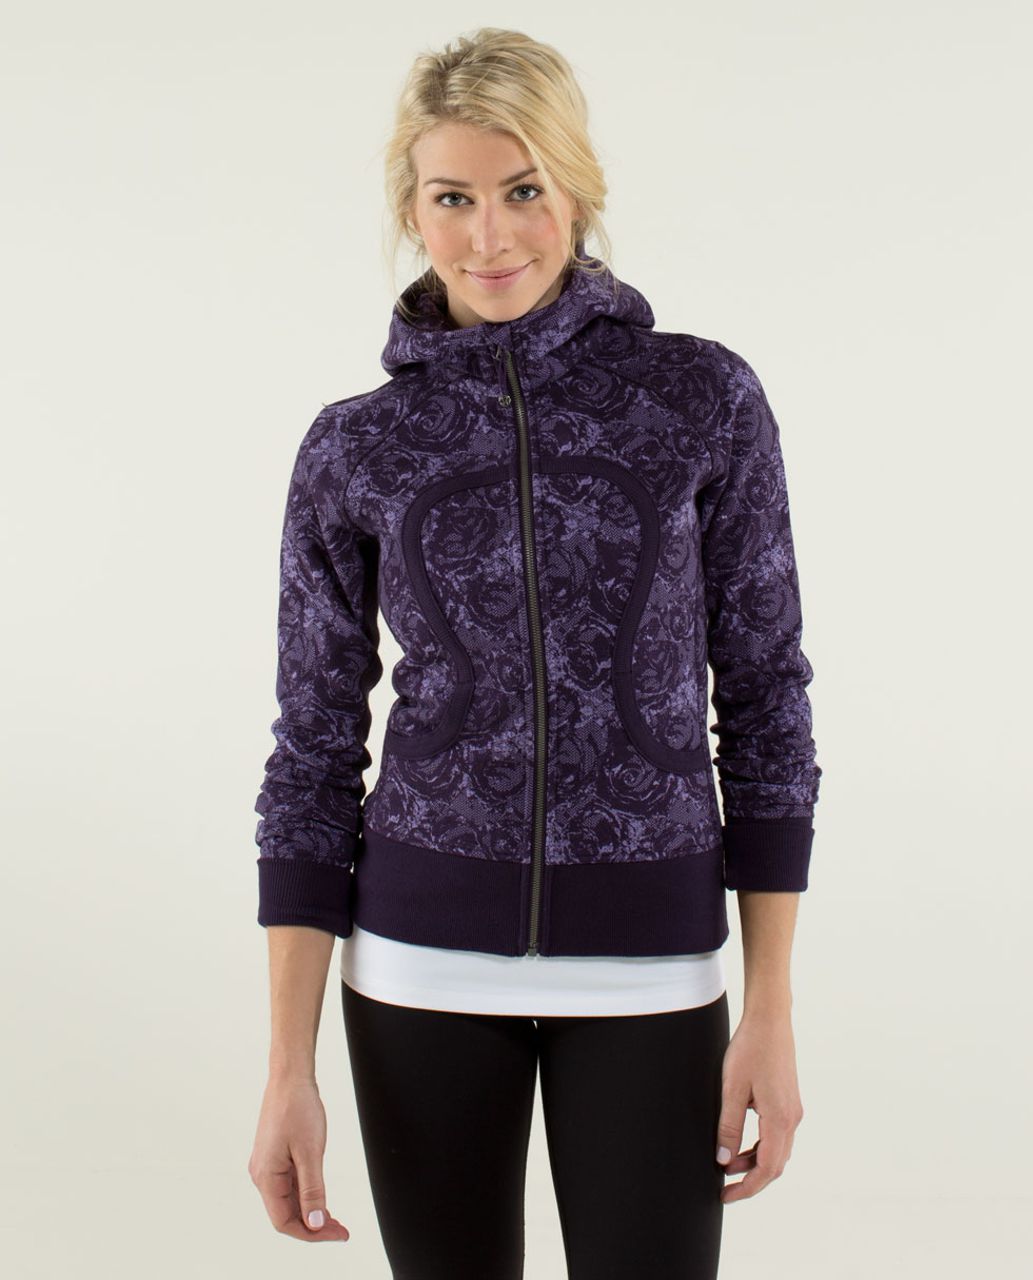 Heathered Violet Verbena scuba hoodie (12) & OTF cassis cameo (8) - why did  no one tell me how amazing scuba hoodies are?! : r/lululemon